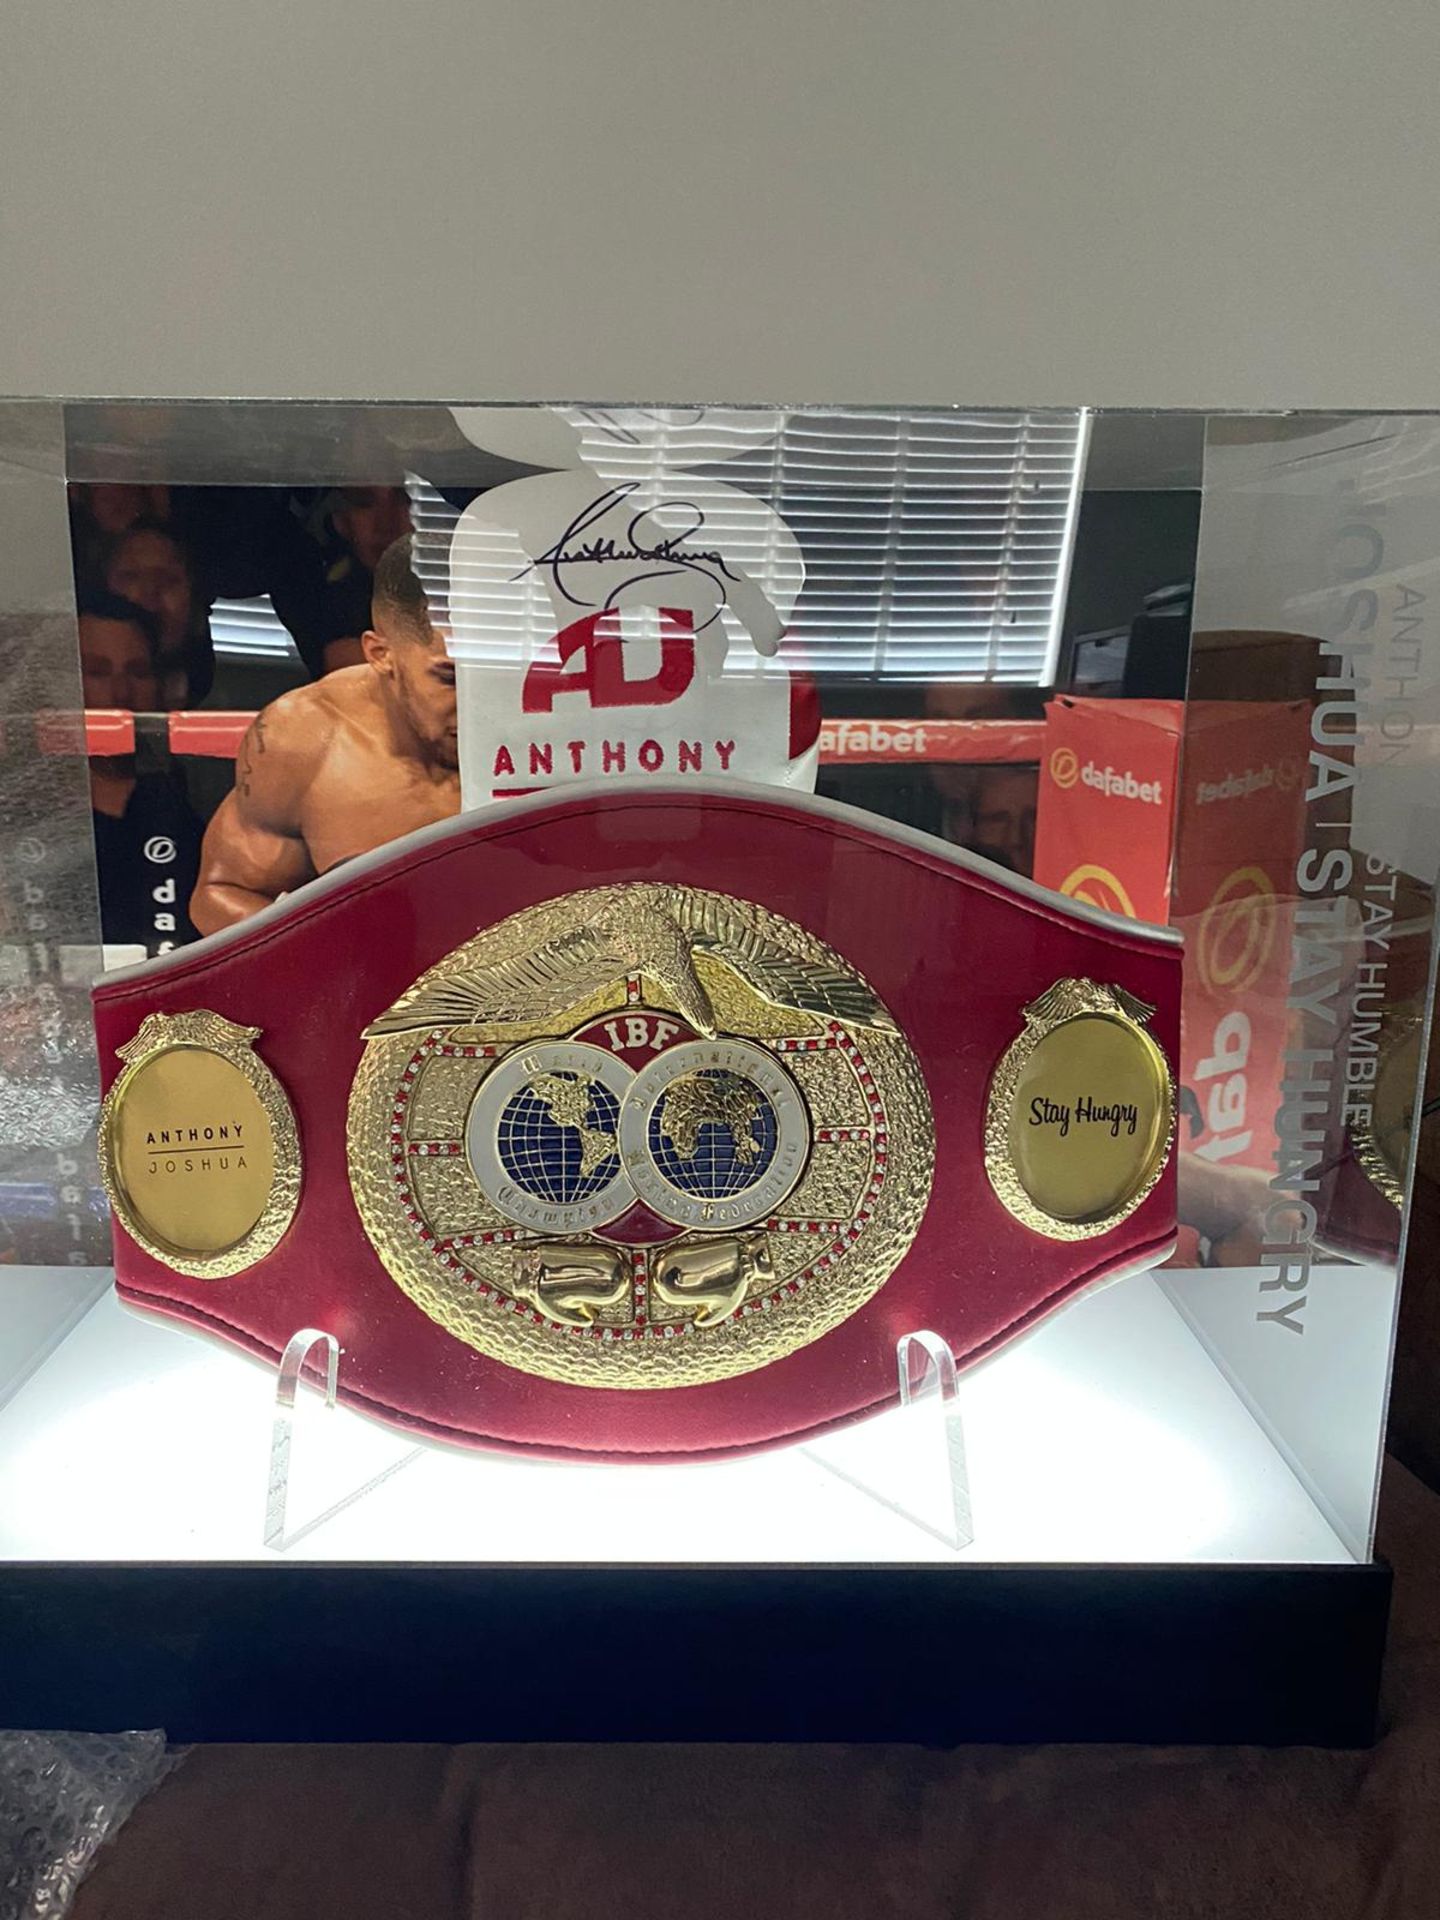 Anthony Joshua Signed Glove With A IBF Belt In A Led Light Up Case